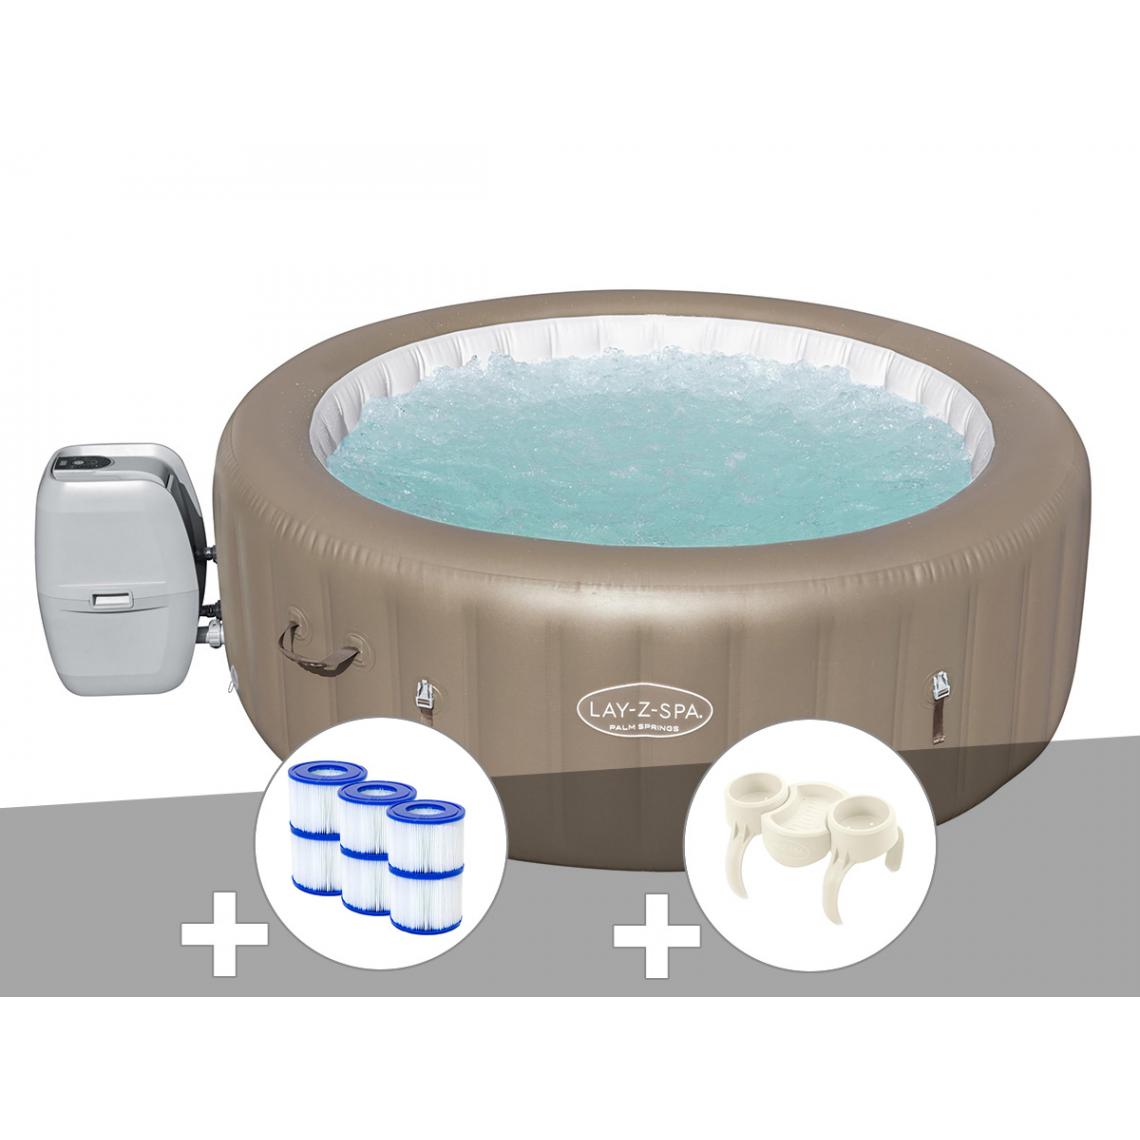 Bestway - Kit spa gonflable Bestway Lay-Z-Spa Palm Springs rond Airjet 4/6 places + 6 filtres + Porte-gobelets - Spa gonflable